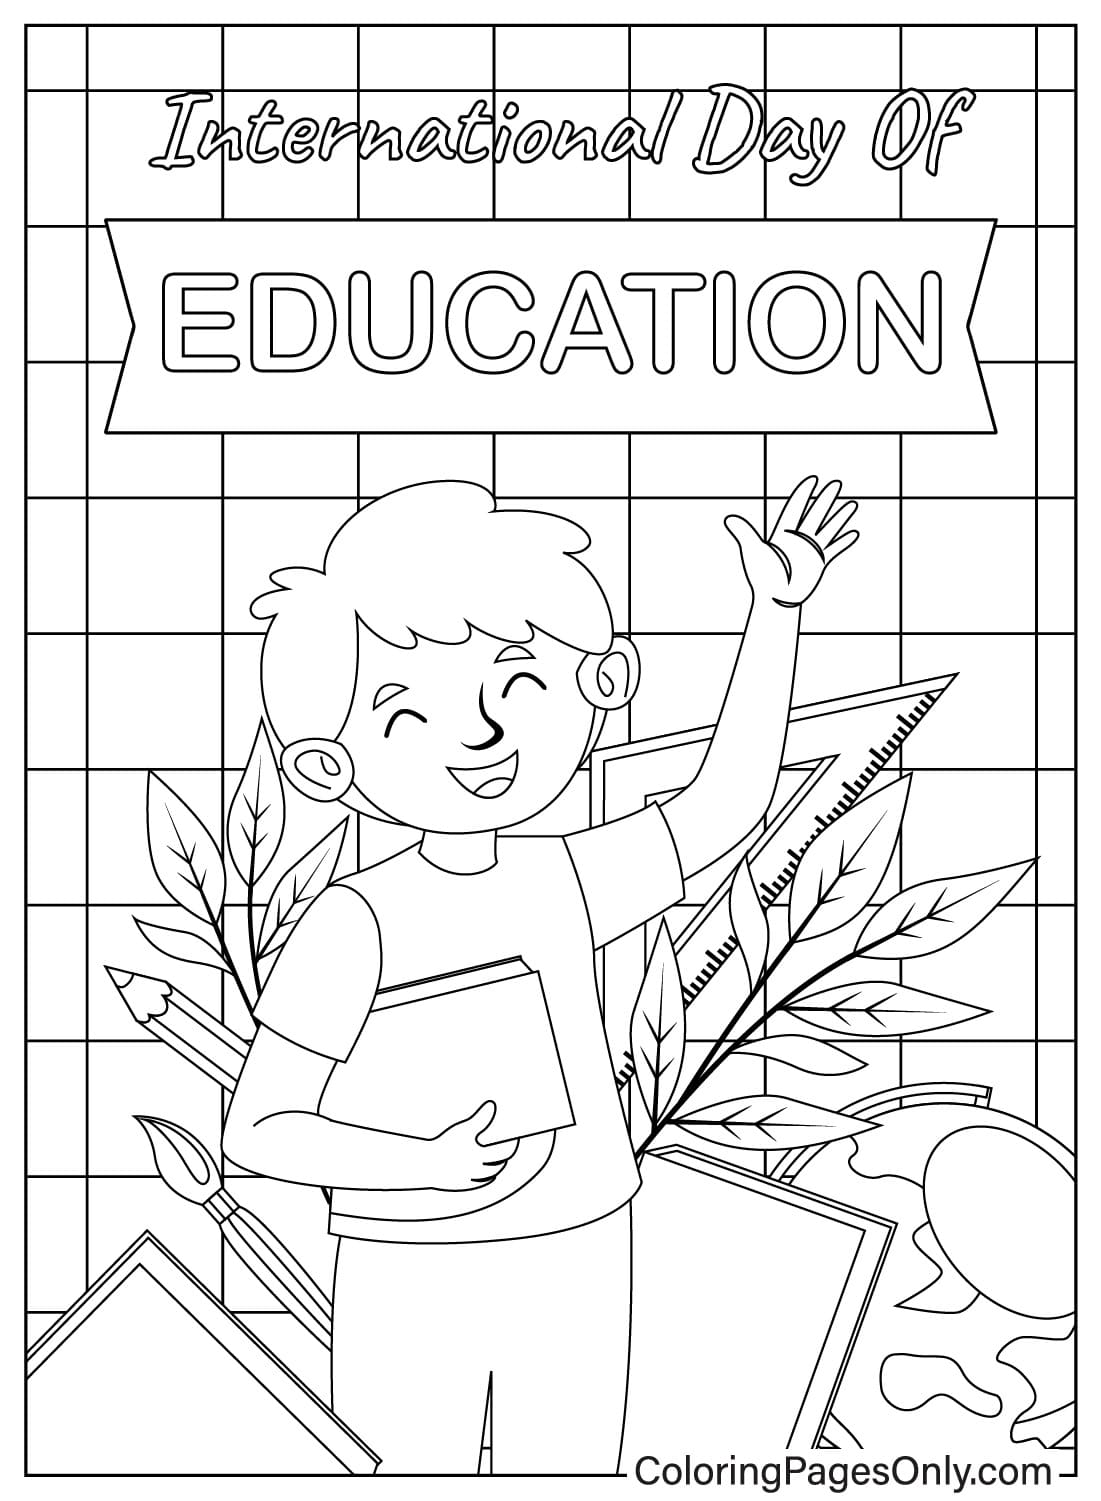 International Day of Education Free Coloring Page from International Day of Education